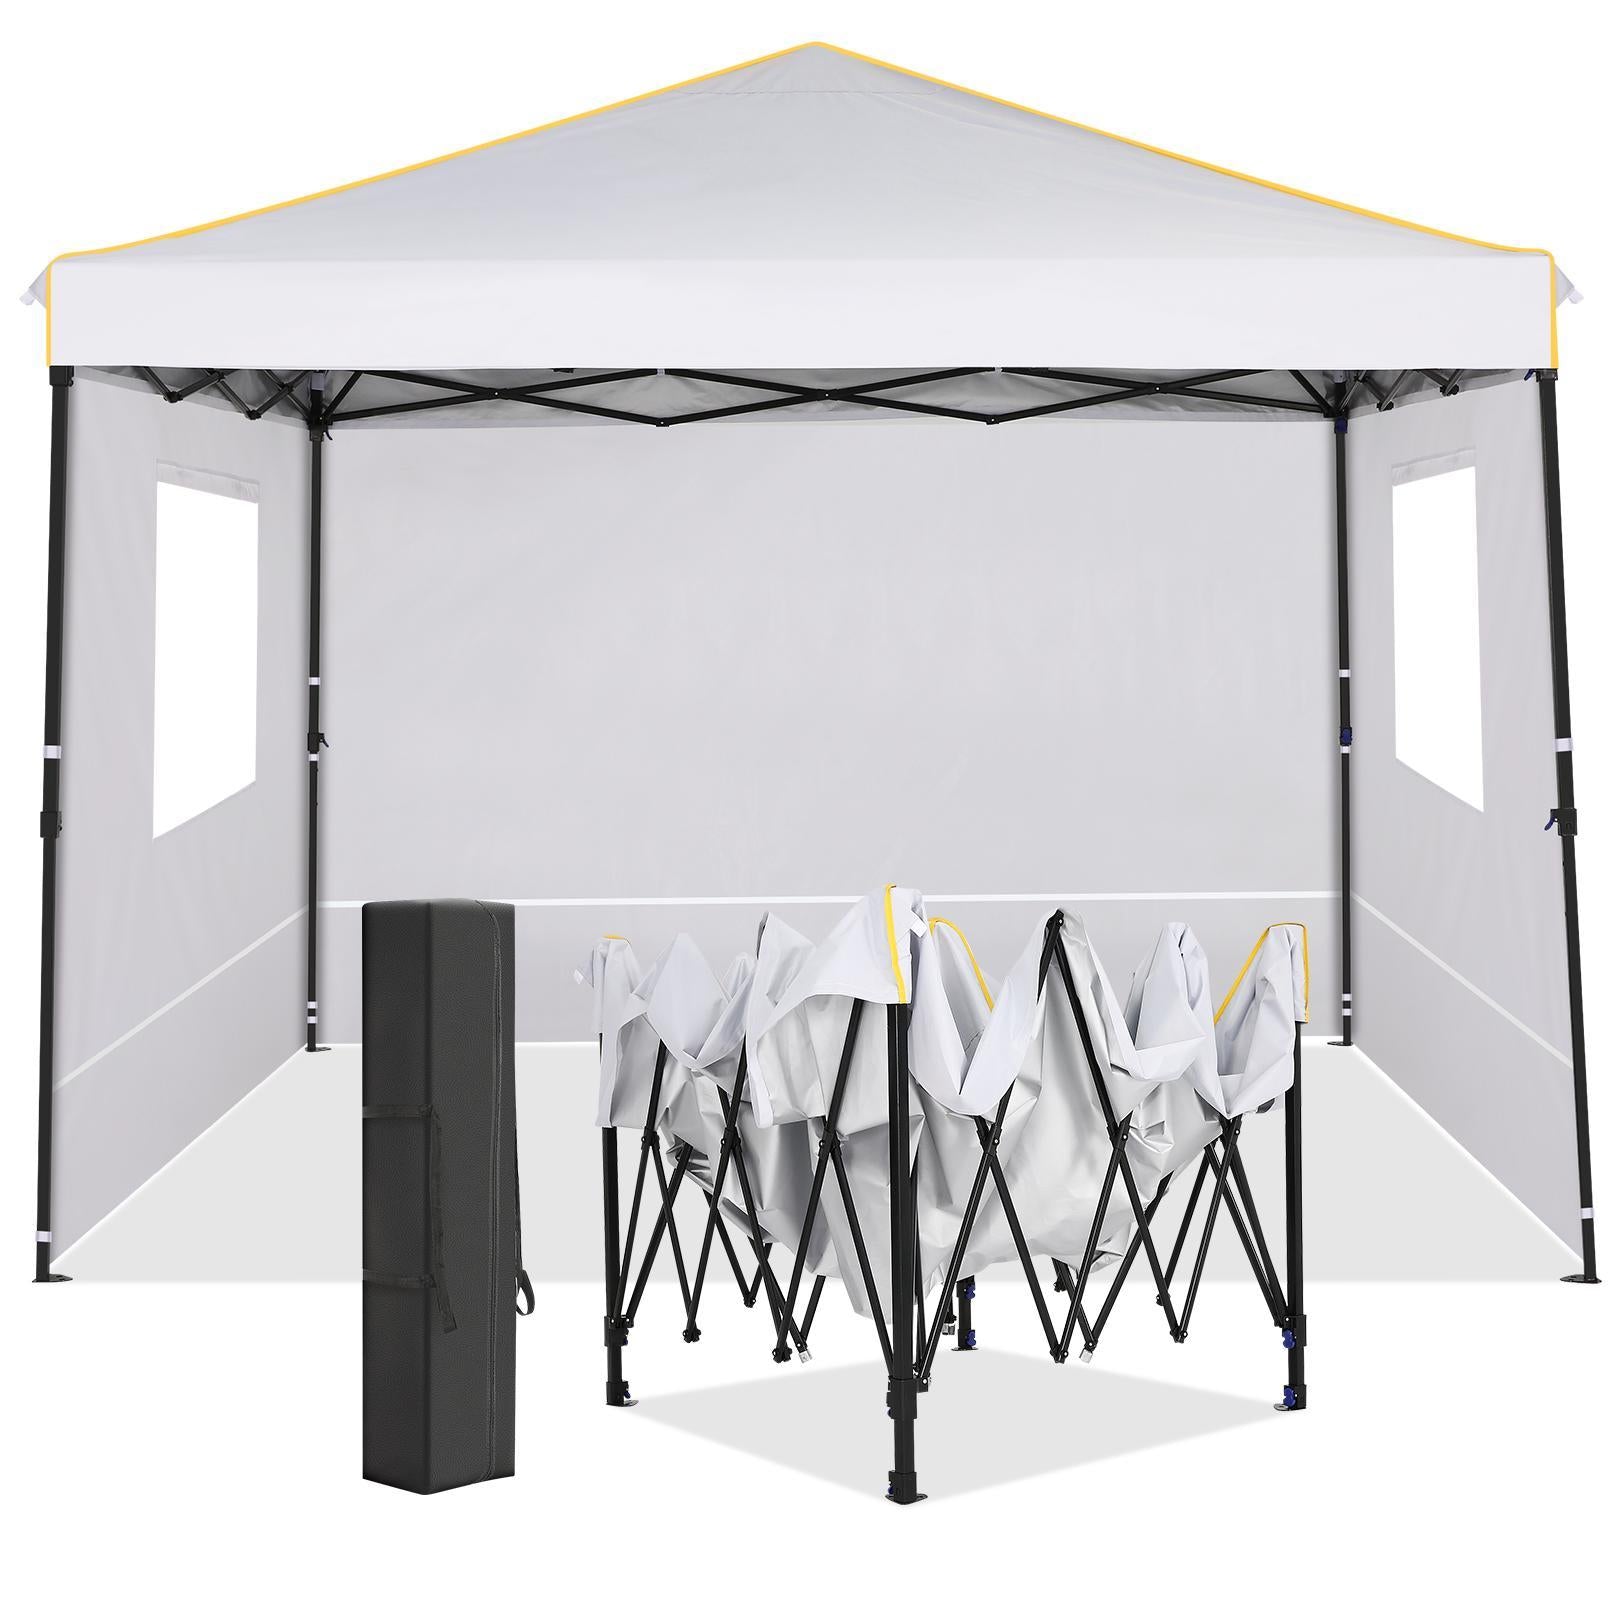 Likein 10x10 ft Pop Up Canopy Tent with 4 Removable Sidewalls, Commercial Instant Gazebo Tent, Outdoor Canopy Tents for Party/Exhibition/Picnic with Carry Bag, Clearance - Gray